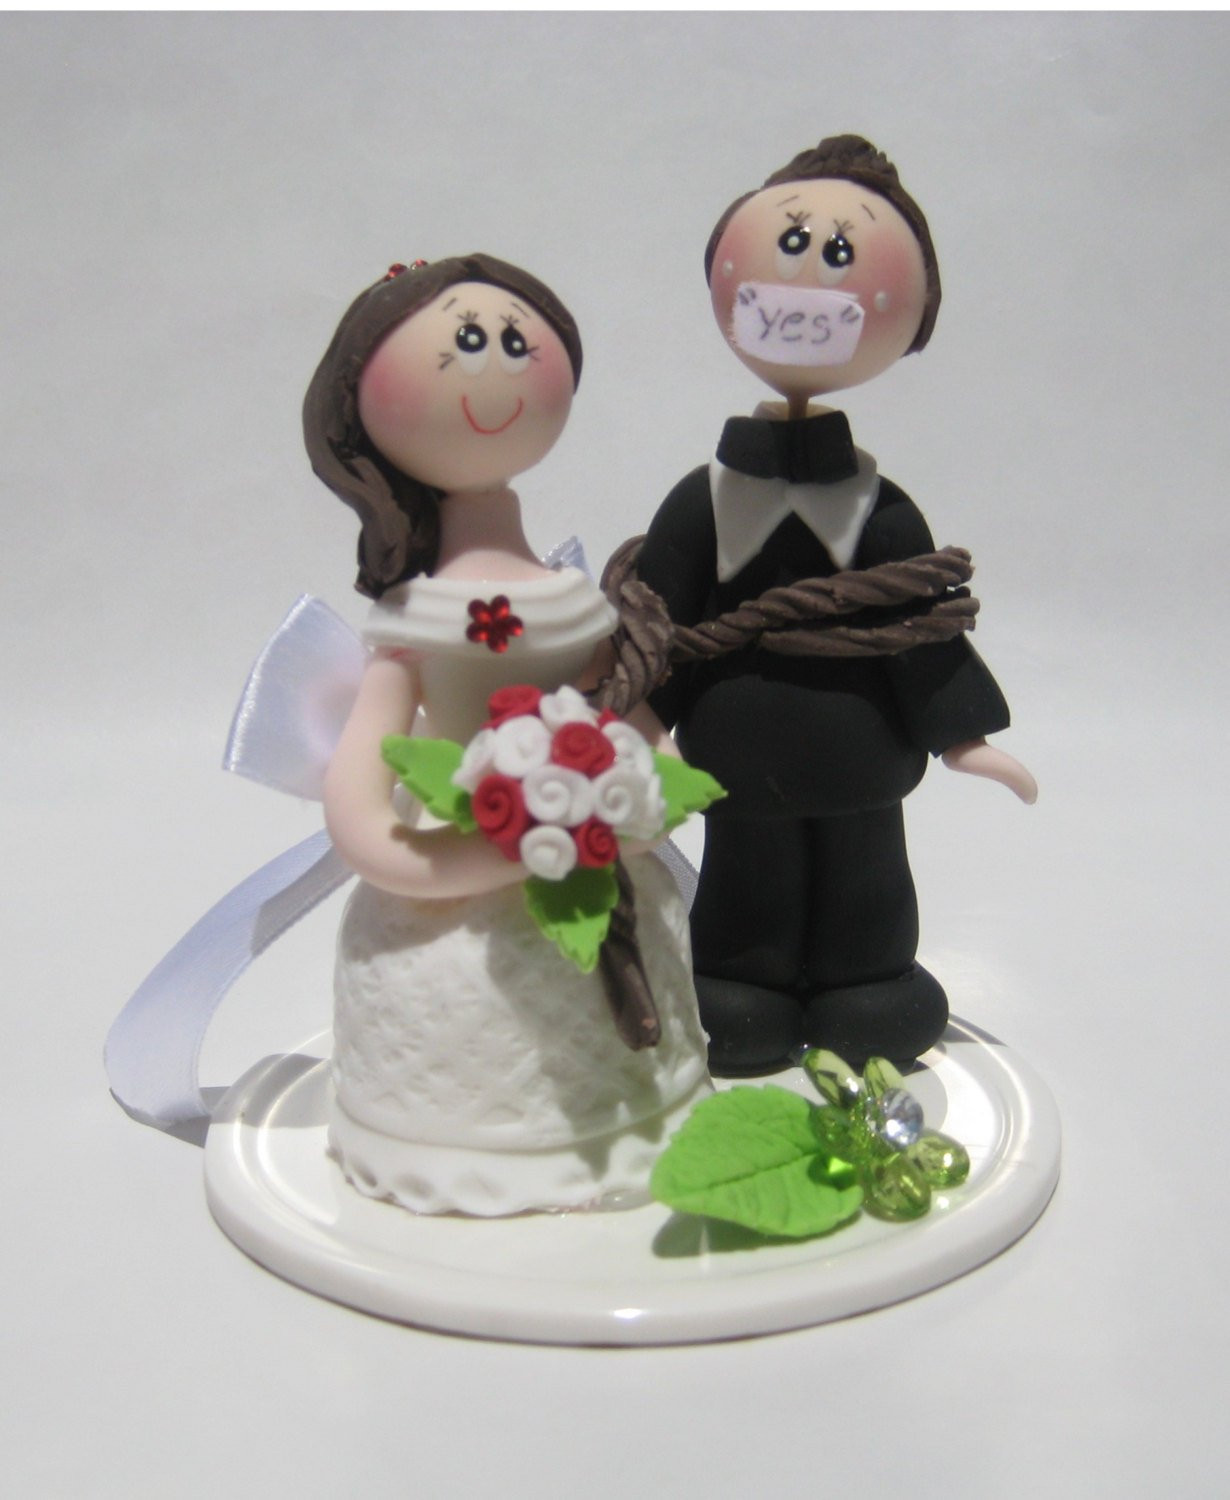 Cake Toppers For Wedding Cakes
 Wedding cake topper funny wedding cake topper cake topper